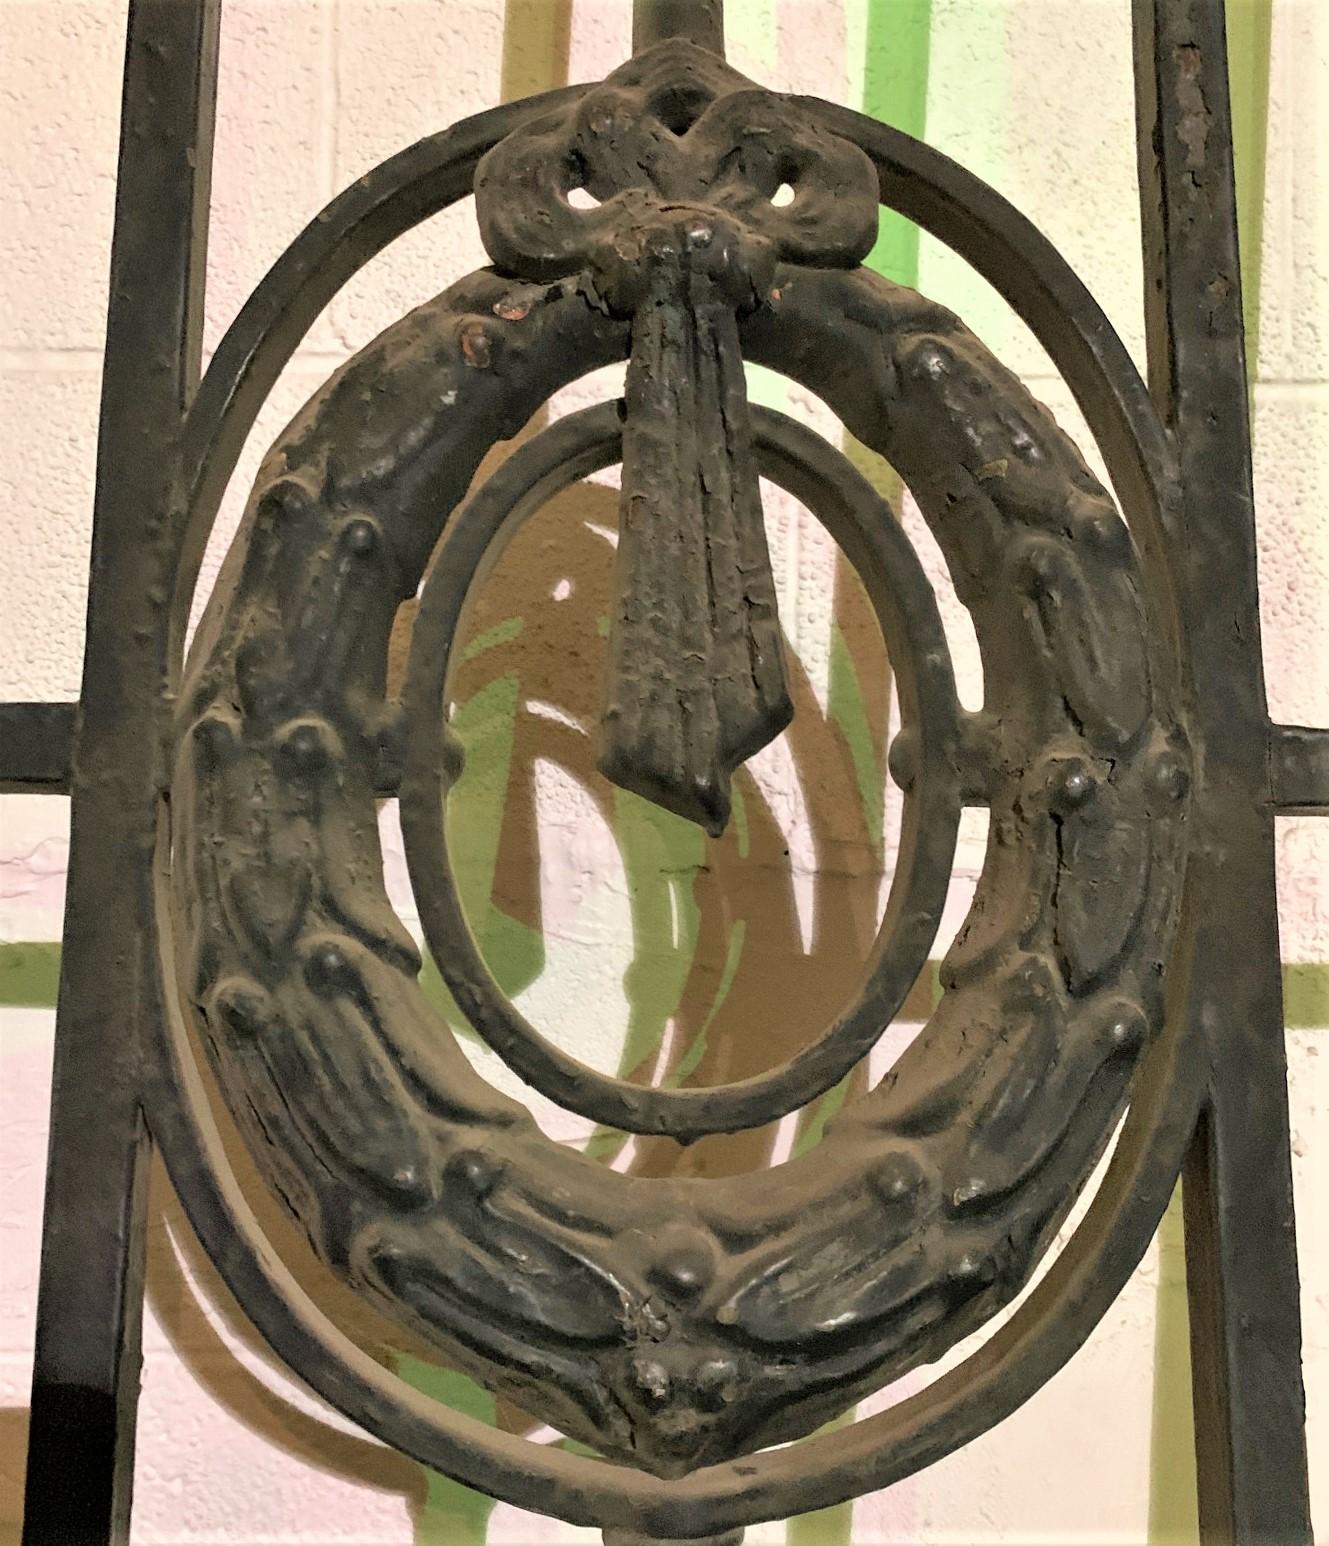 Fabulous large pair of French architectural wrought iron gates featuring fine handcrafted scroll work, textured glass inset panels, and laurel wreaths held by a knotted ribbon. Multiple uses, ready to install;

circa 1880.